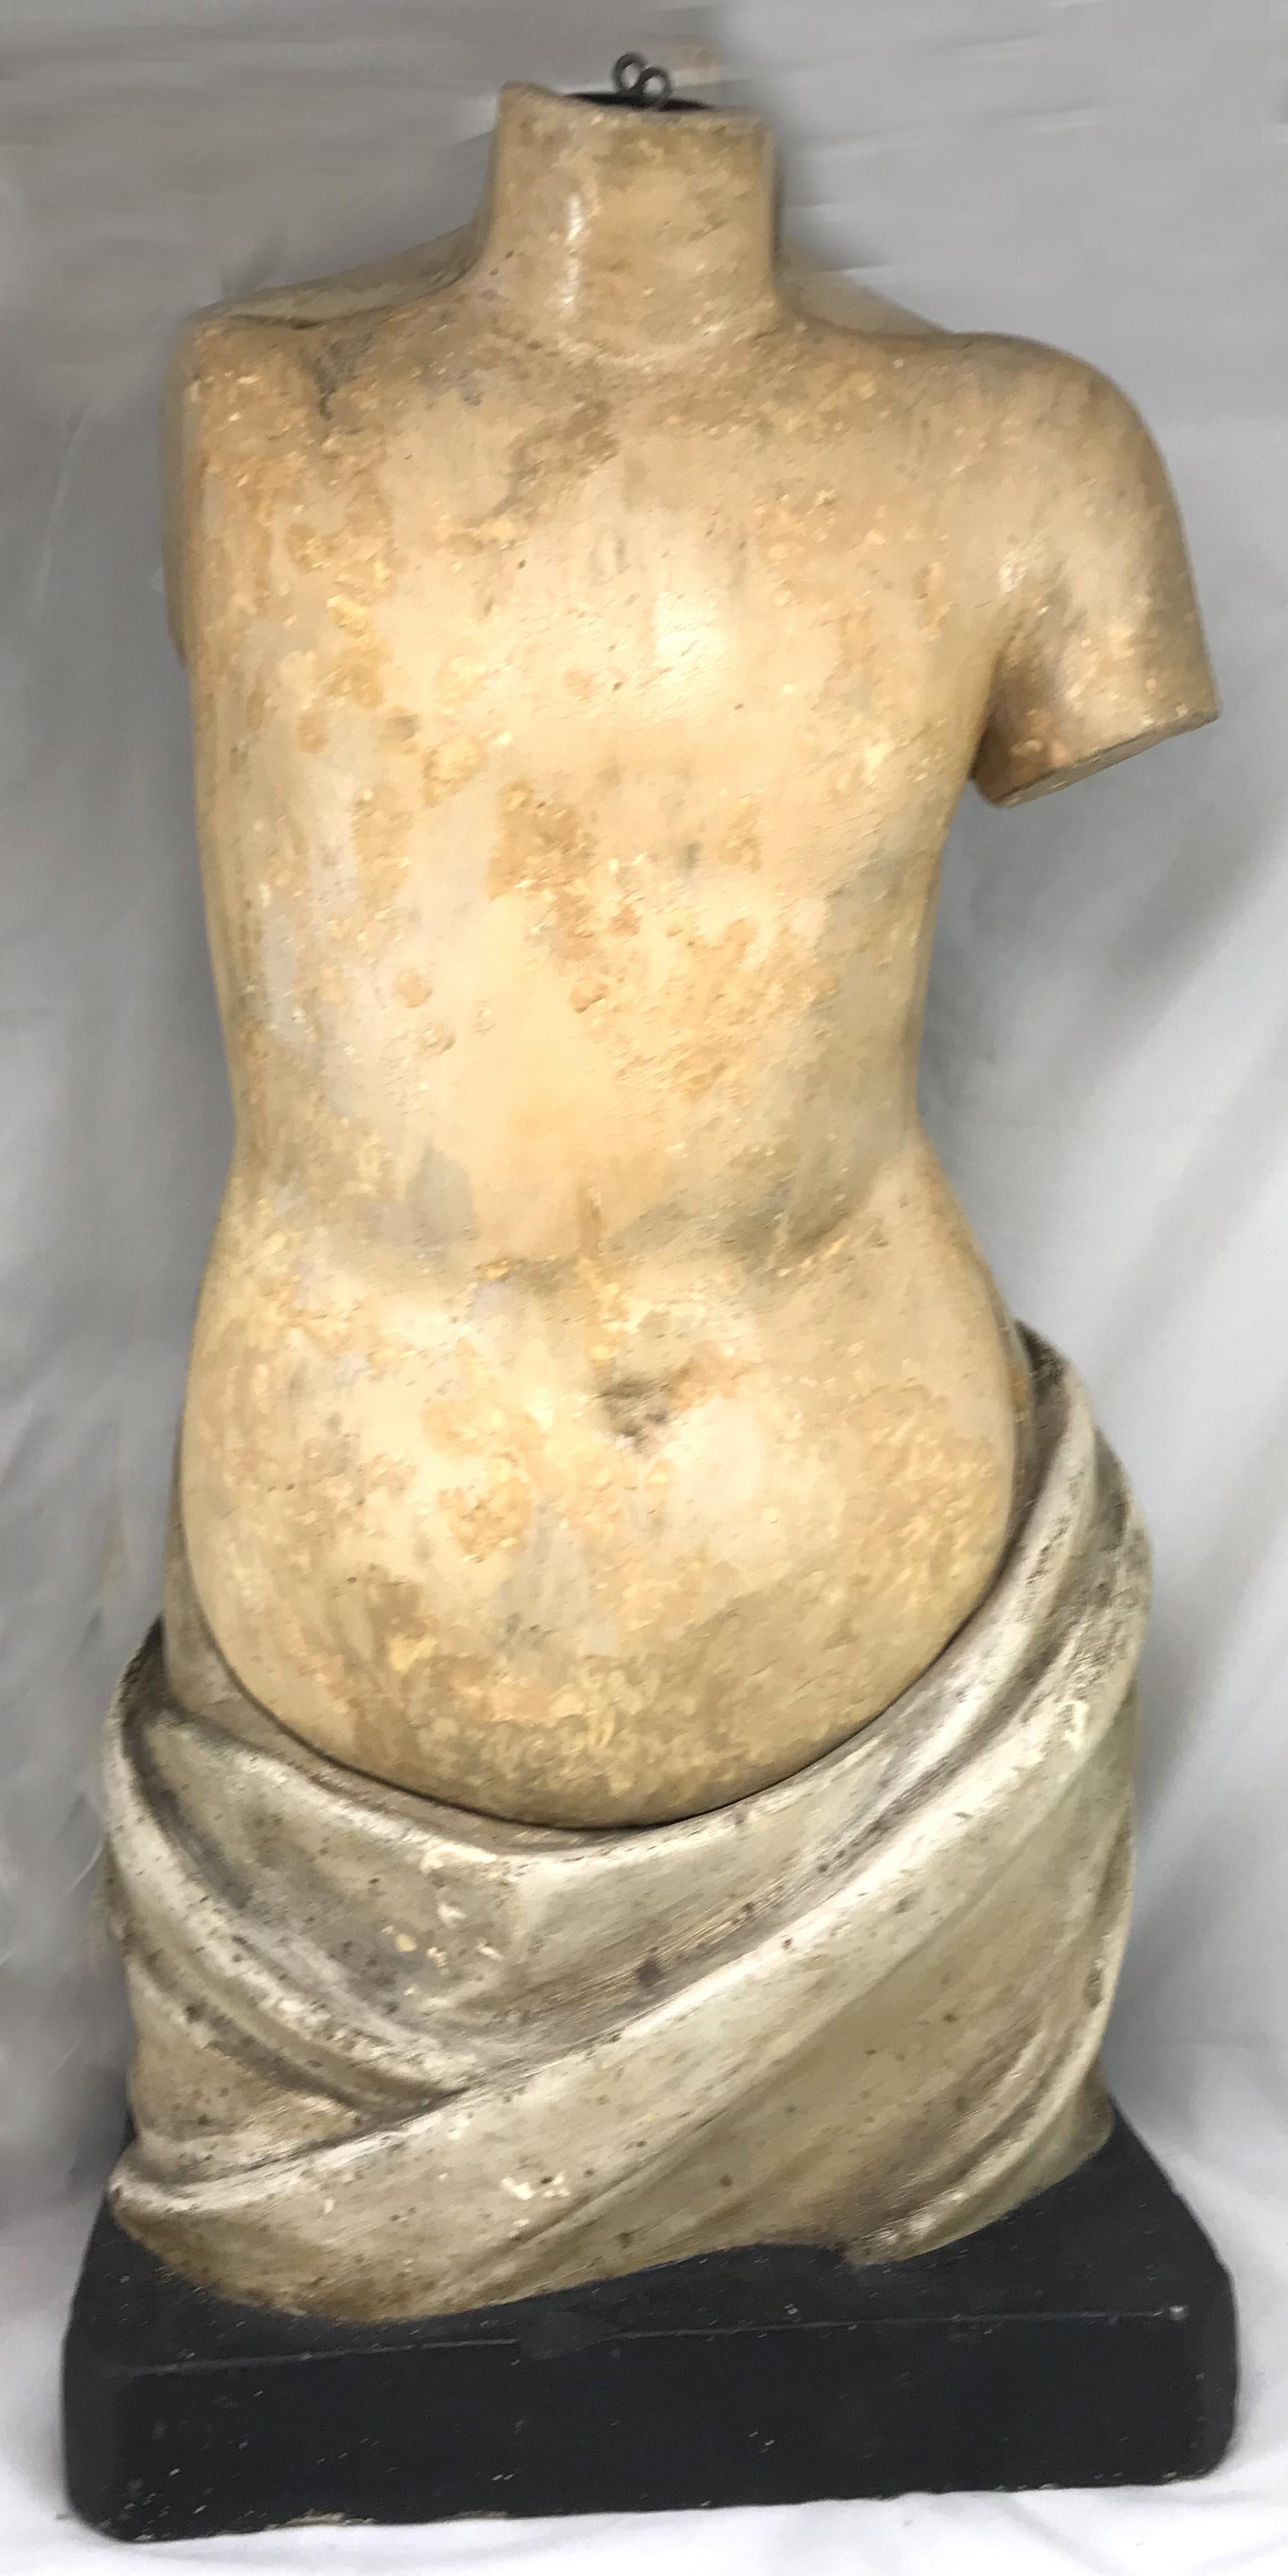 A wonderful example of a plaster polychrome anatomy teaching model torso with removable body parts including heart, lungs, and other organs. Probably American in origin, probably dating to the 19th century, in very good condition, with some paint